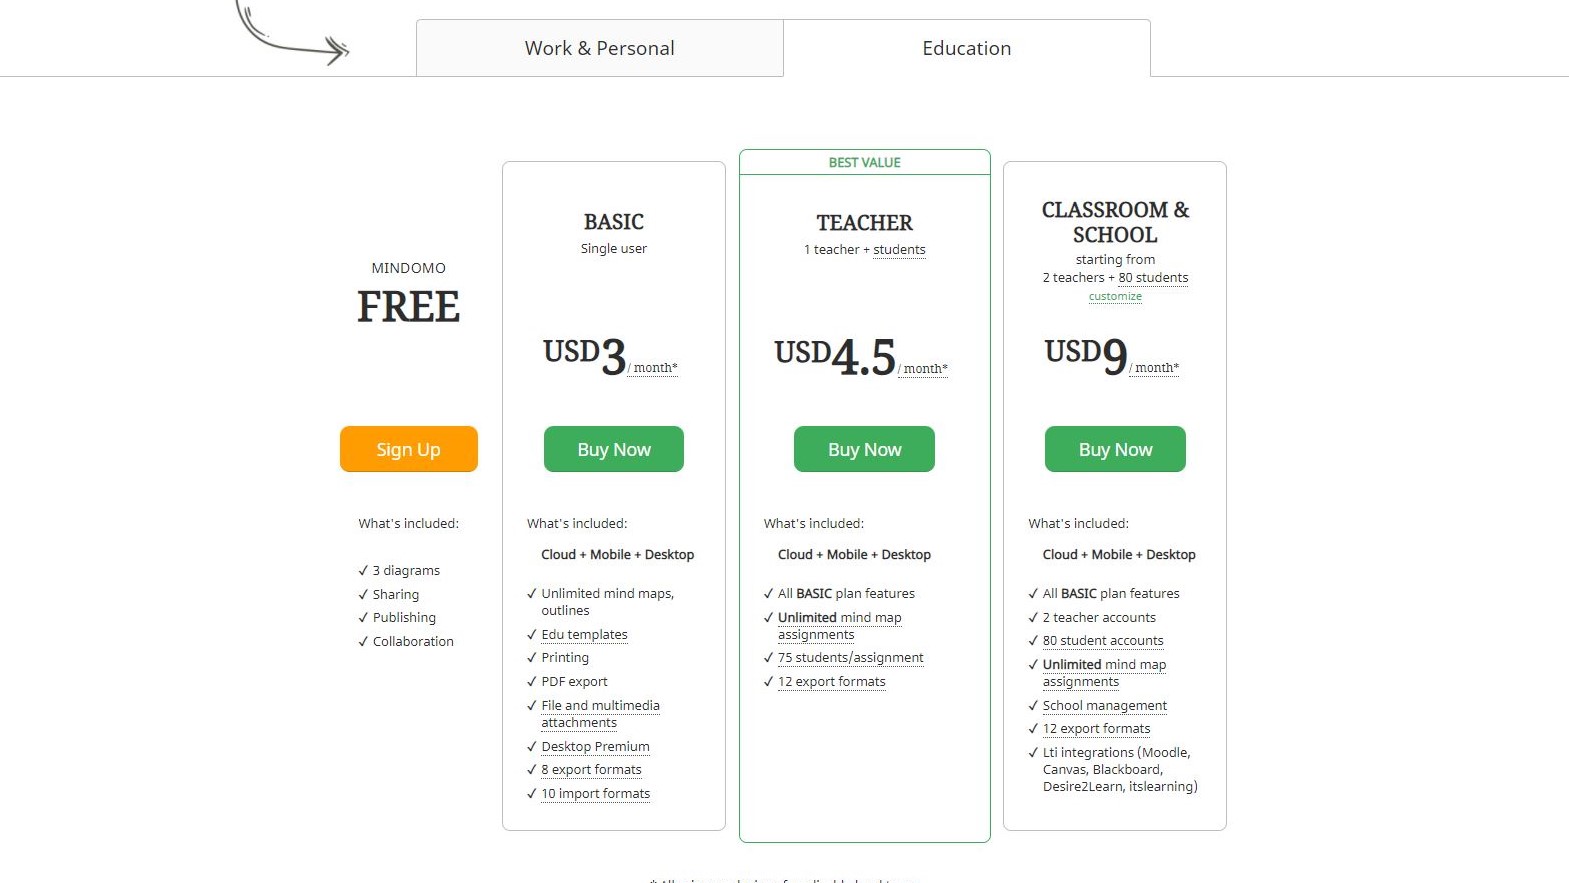 Education Pricing